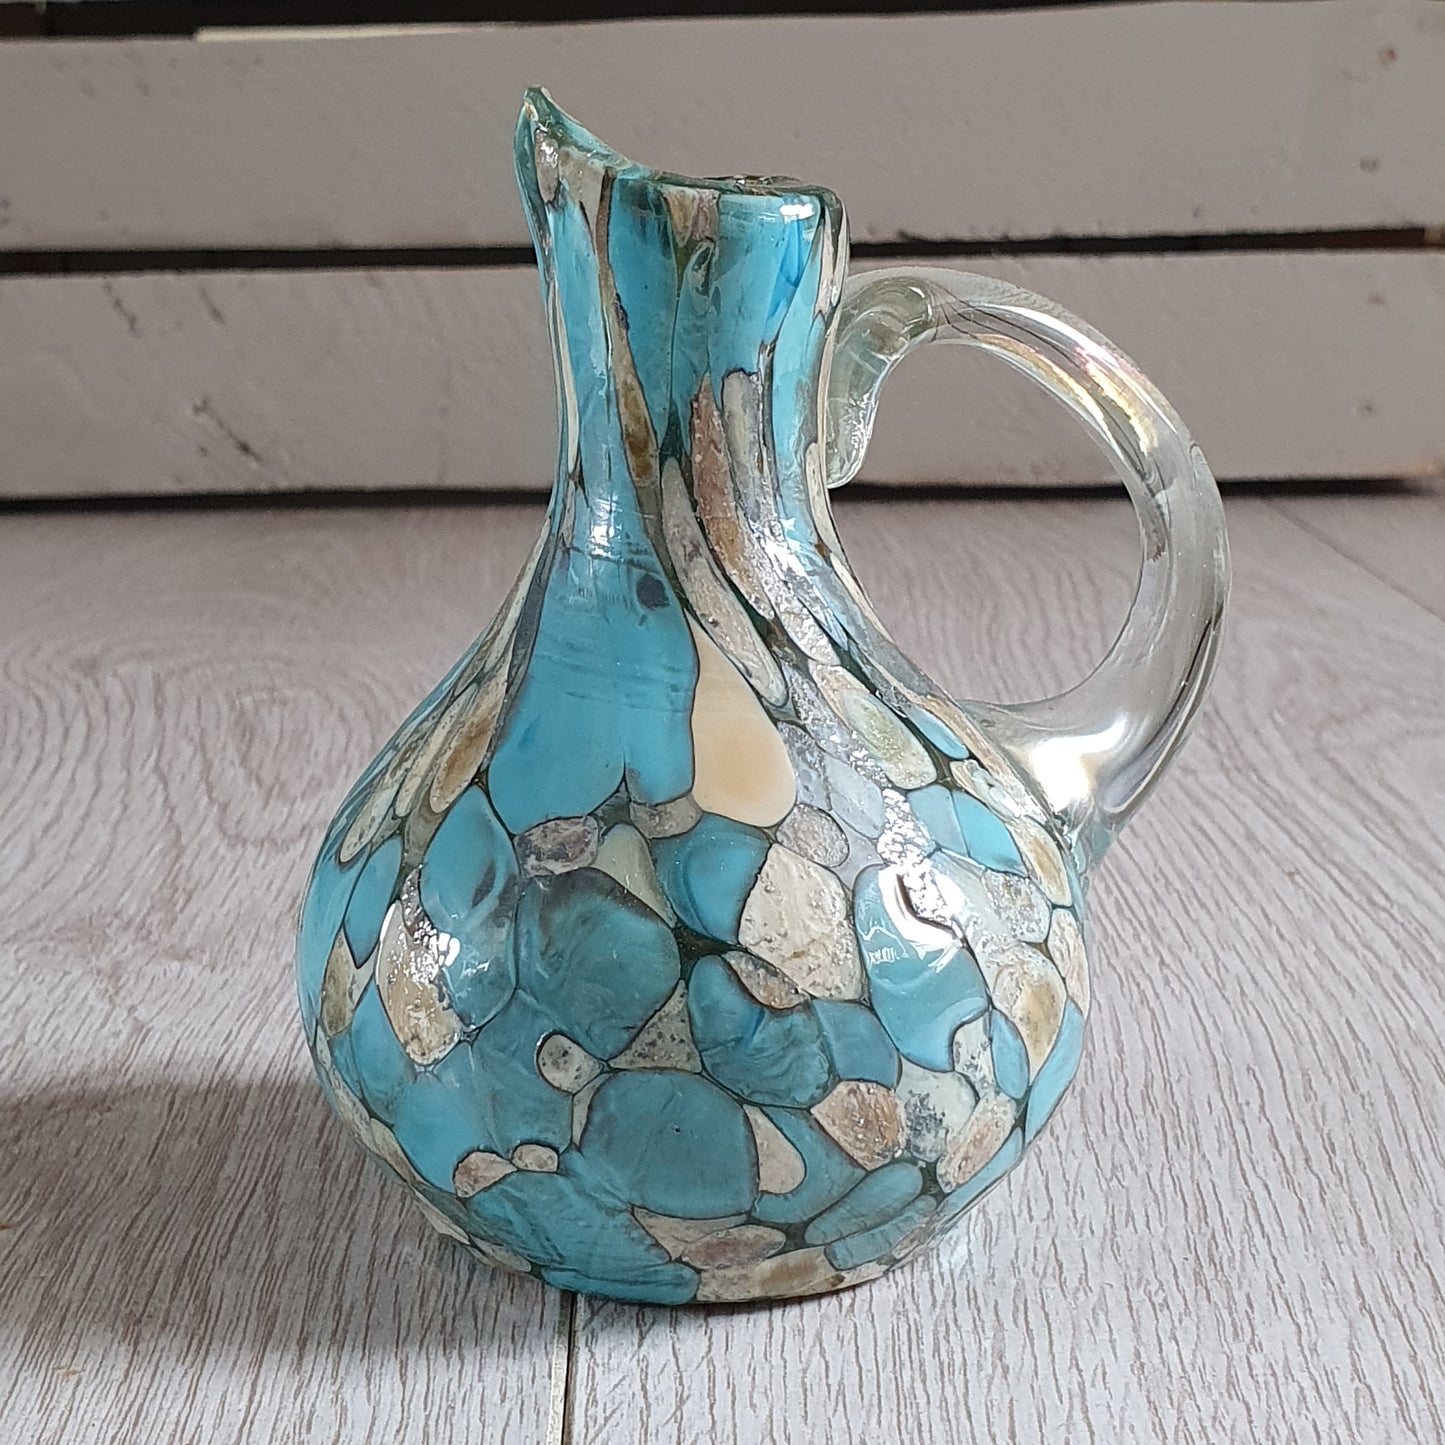 Sirena Turquoise Edition Set of 2 Jugs - Mexican, Turquoise & Marble | Creamer Jugs | Oil Vinegar Jugs